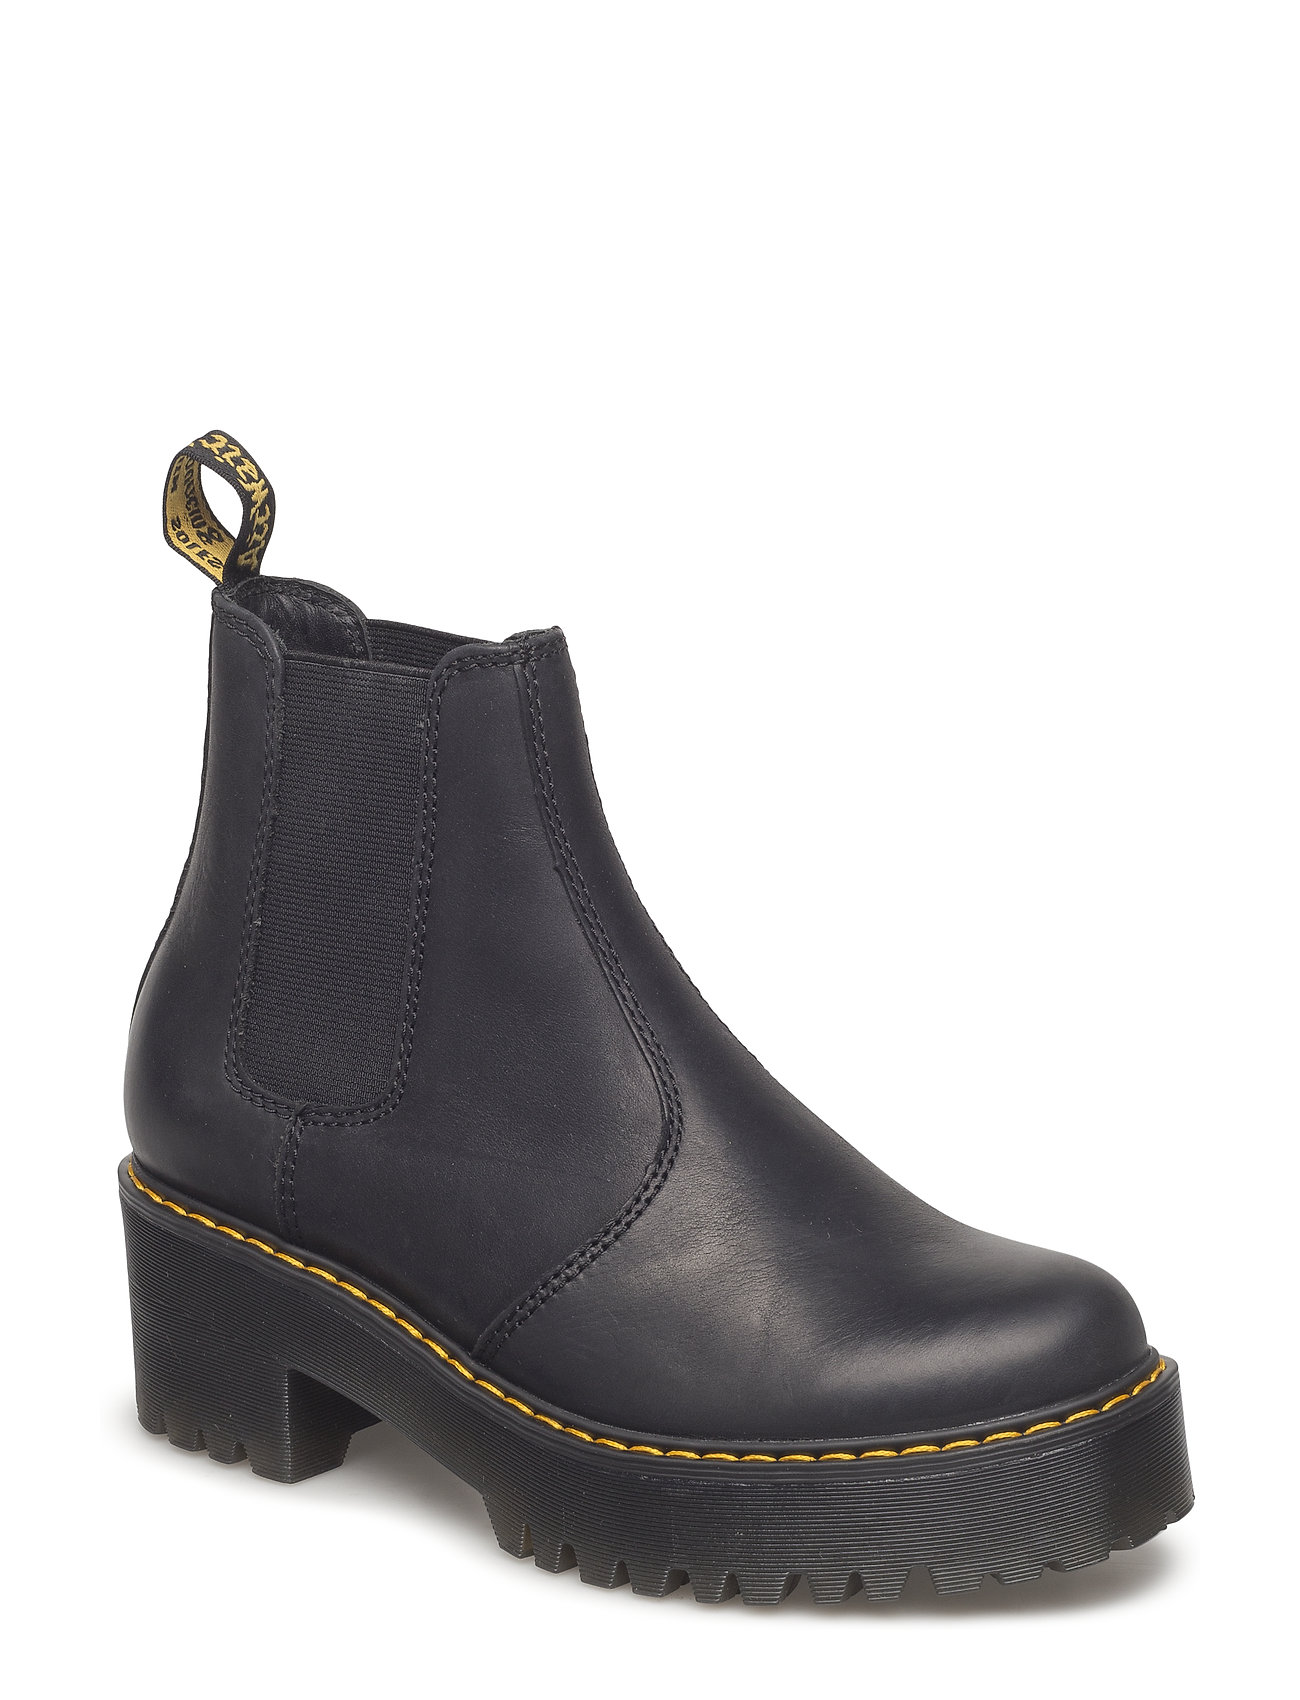 Rometty Black Burnished Wyoming Shoes Chelsea Boots Musta Dr. Martens